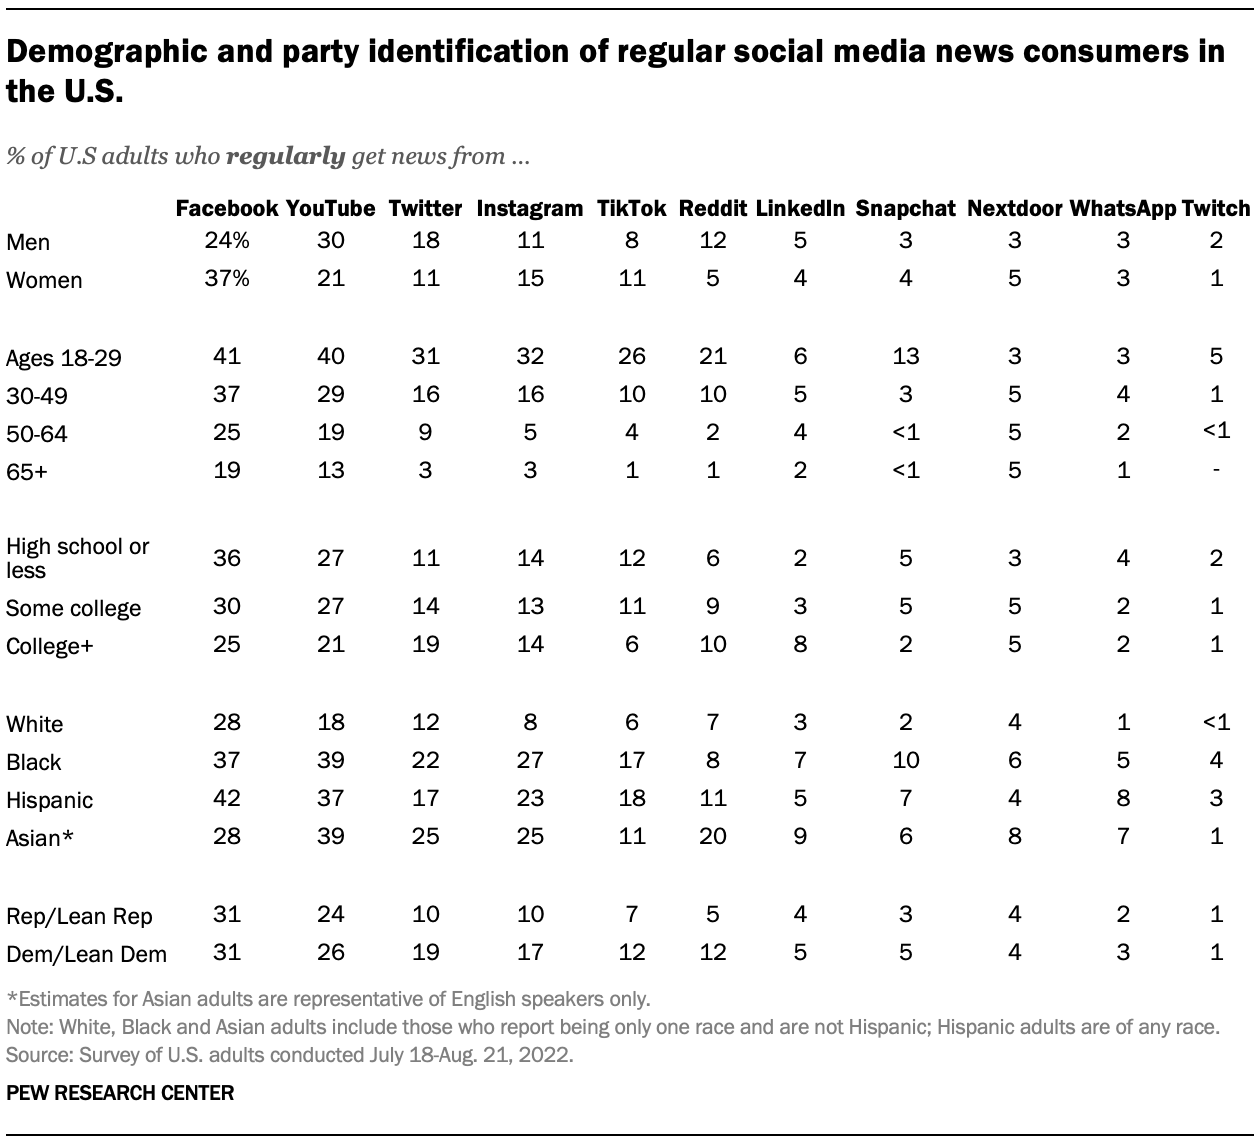 Demographic and party identification of regular social media news consumers in the U.S.